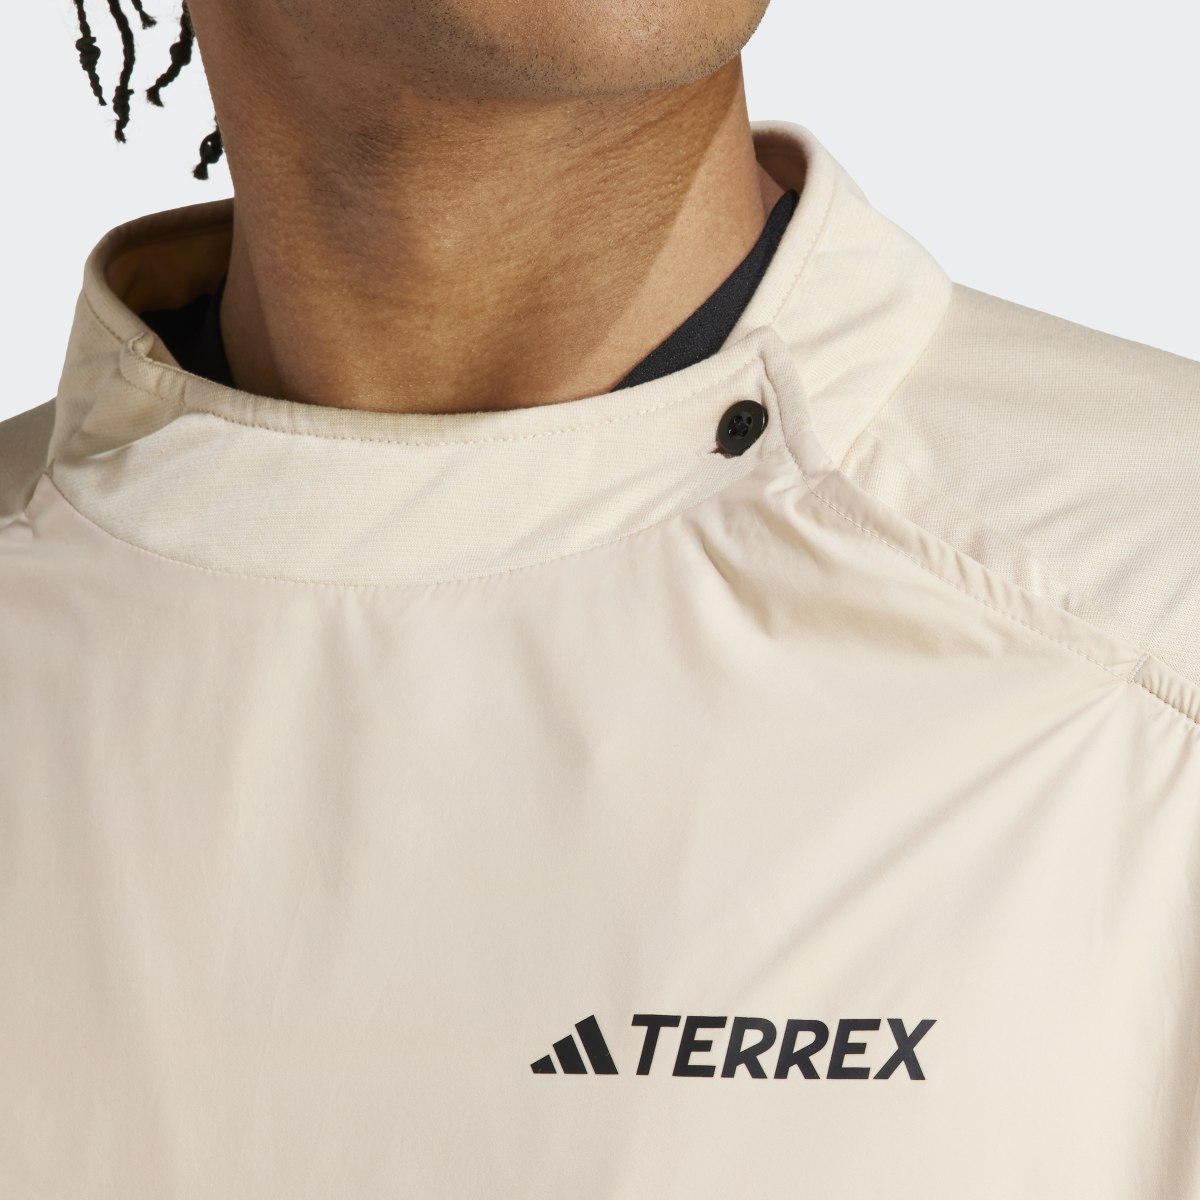 Adidas Terrex Made To Be Remade Hiking Midlayer Top. 8